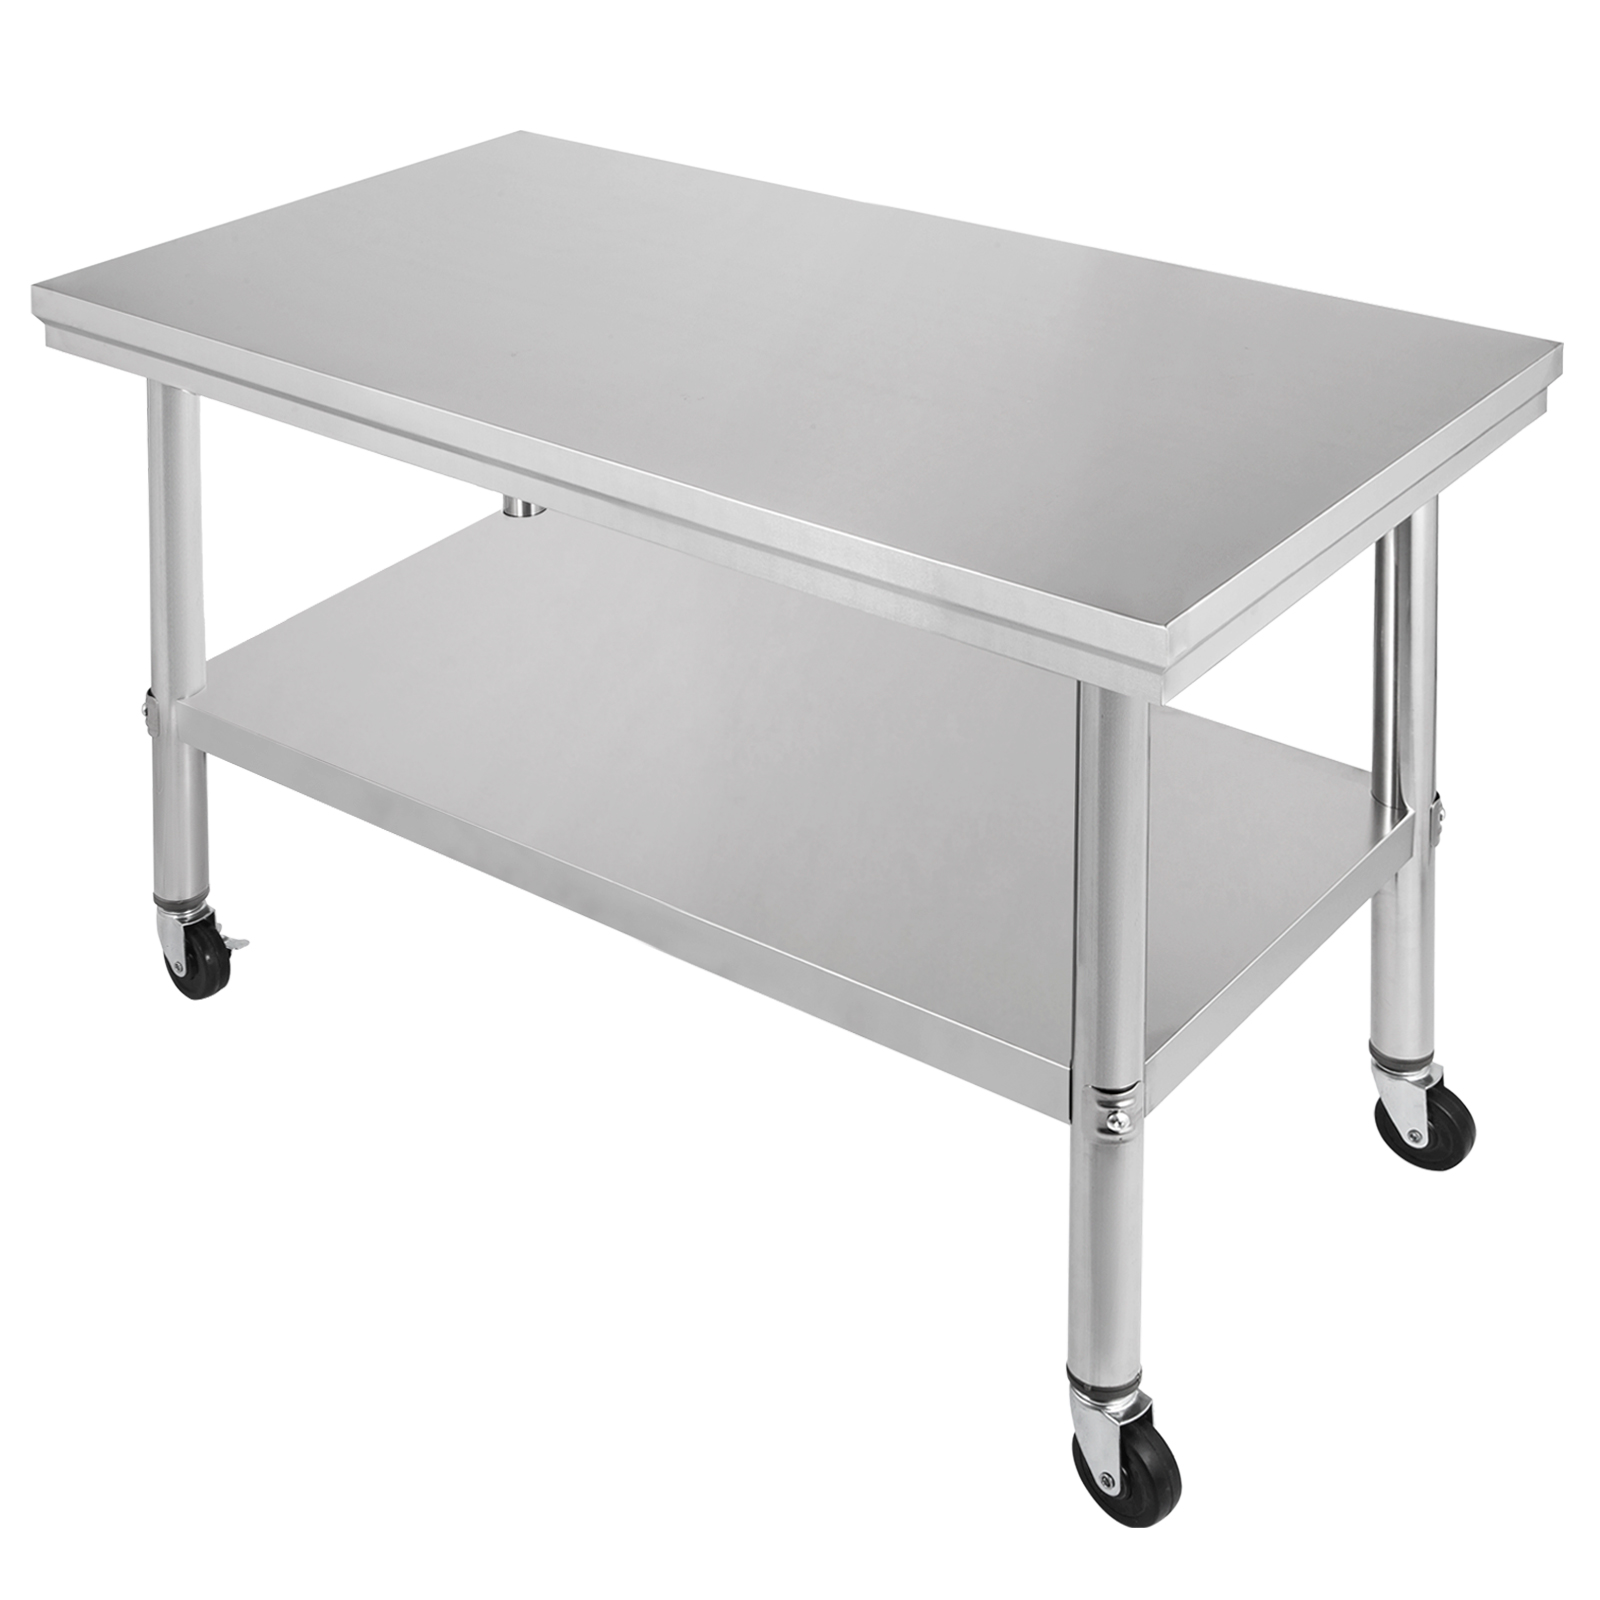 Rolling Stainless Steel Top Kitchen Work Table Cart + Casters Shelving ...